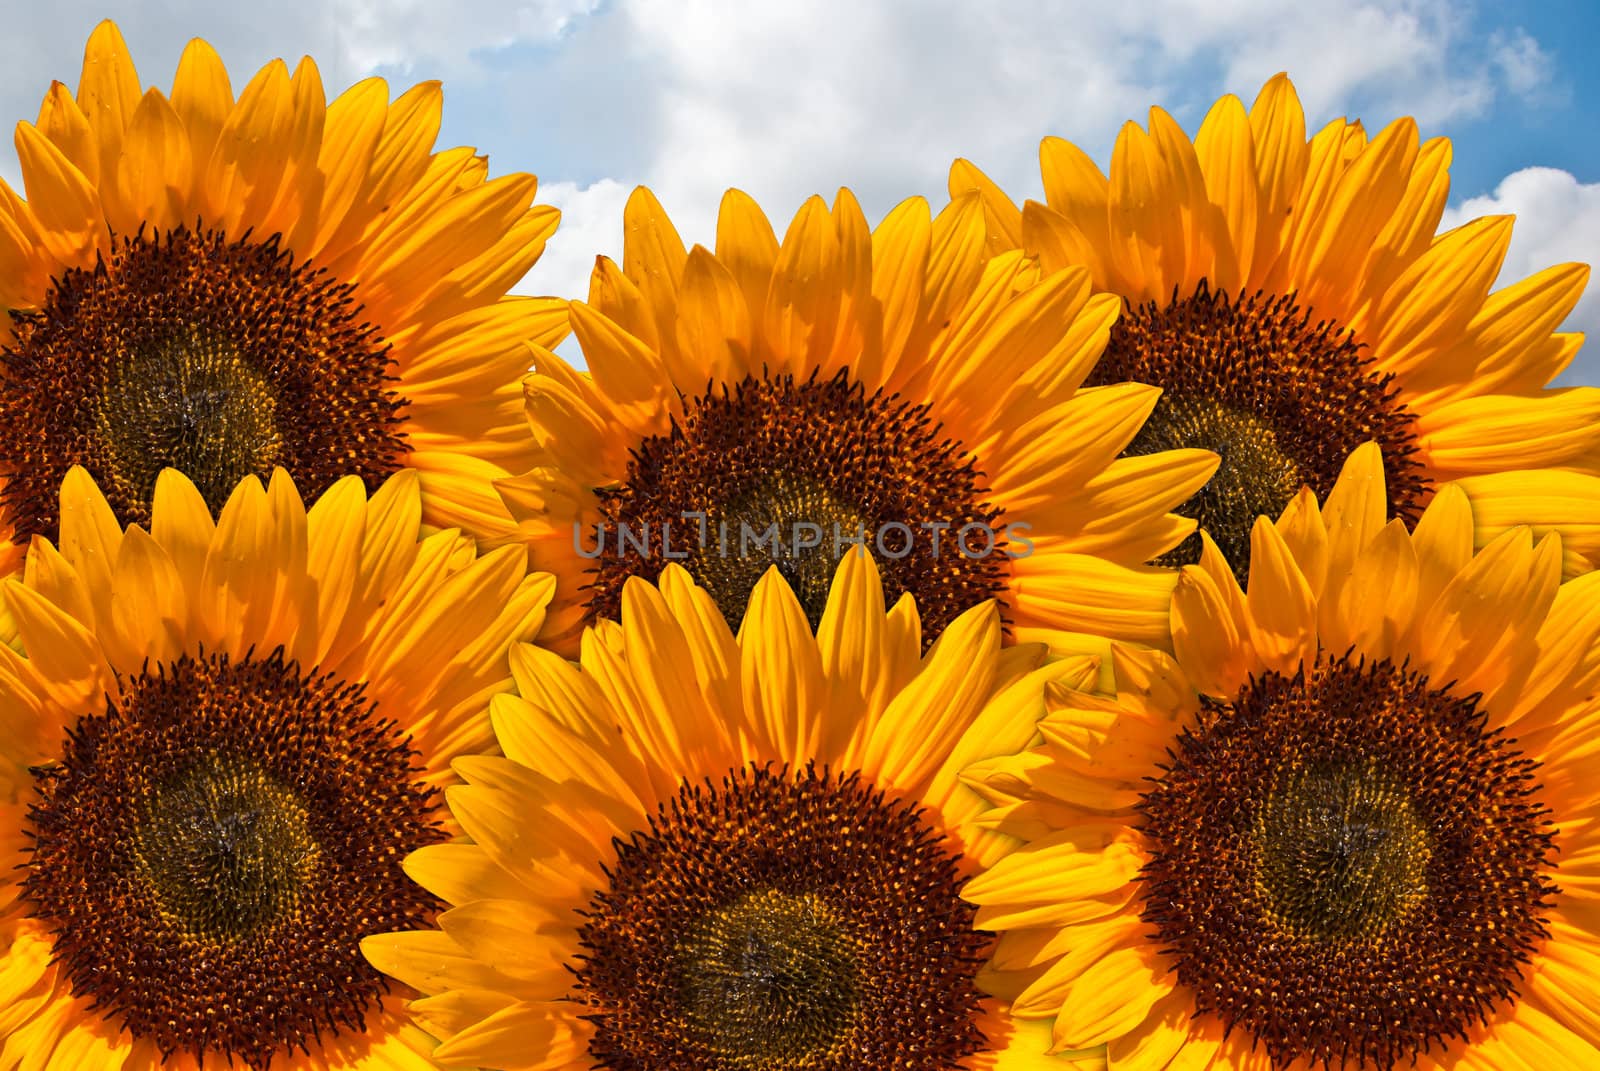 A group of sunflowers by sasilsolutions